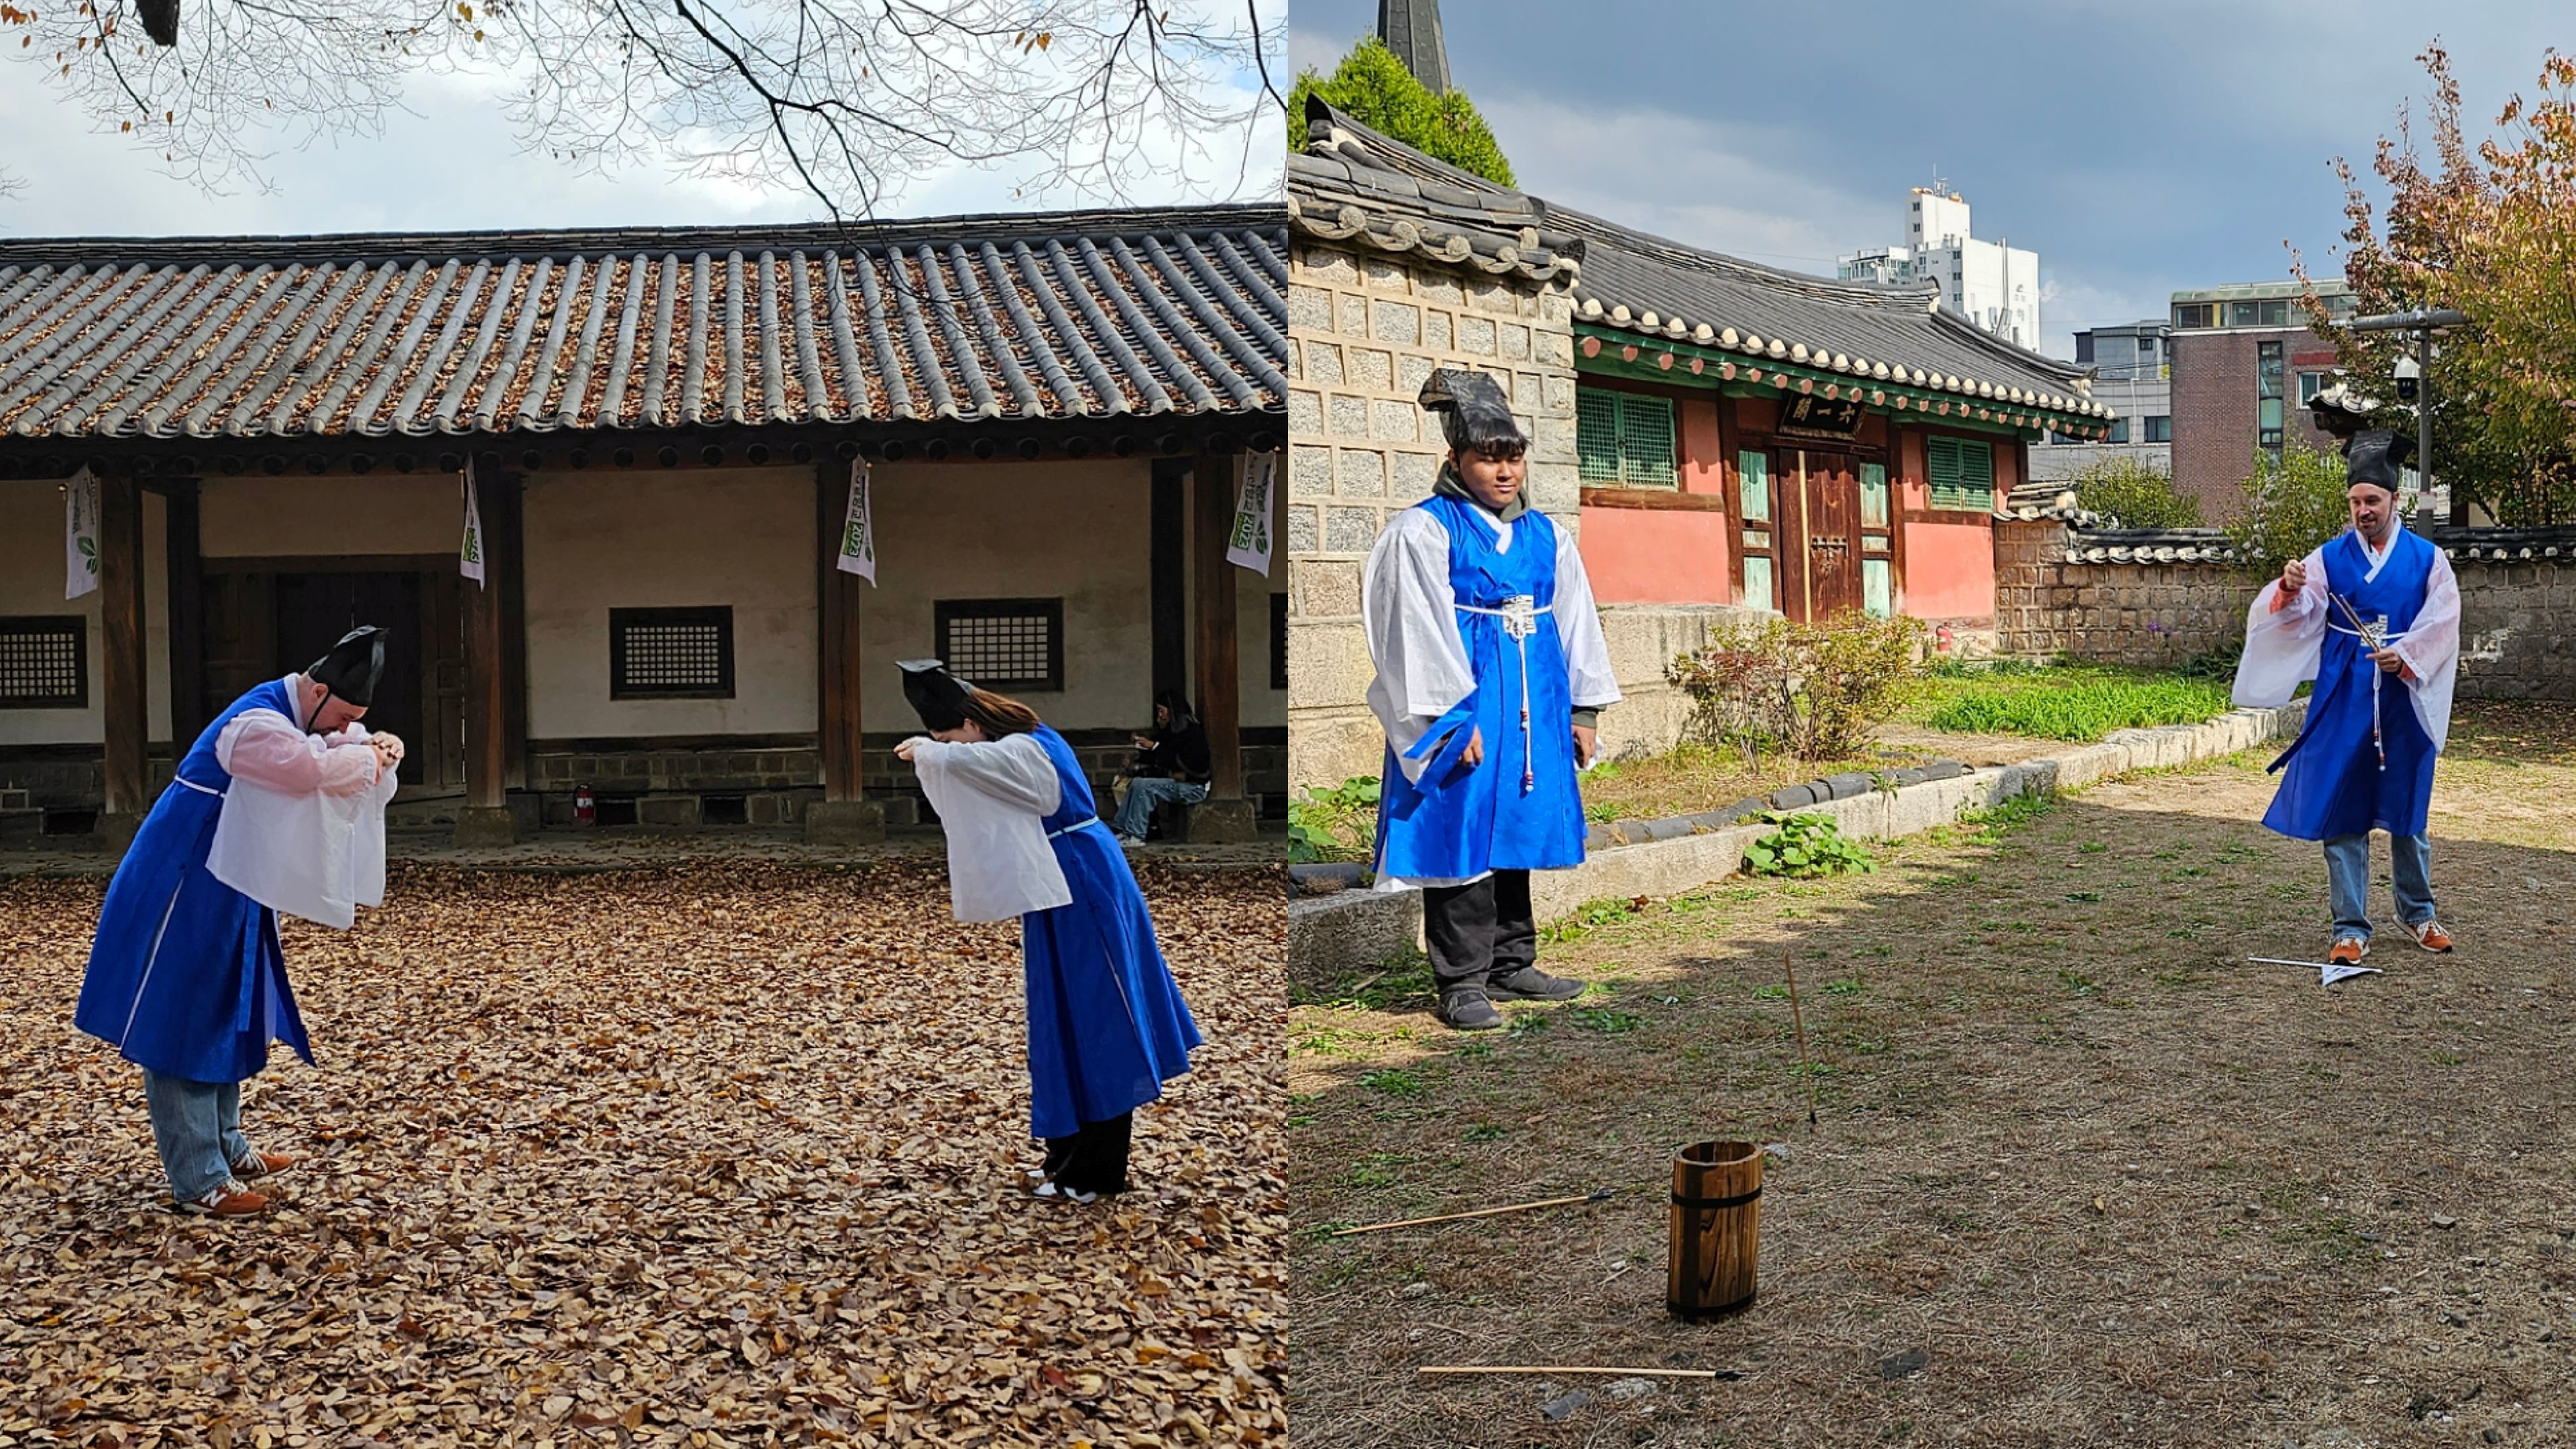 On the left are two participants practicing a Confucian scholar's greeting and on the right shows two more playing tuho (pitch-pot) during the tour.